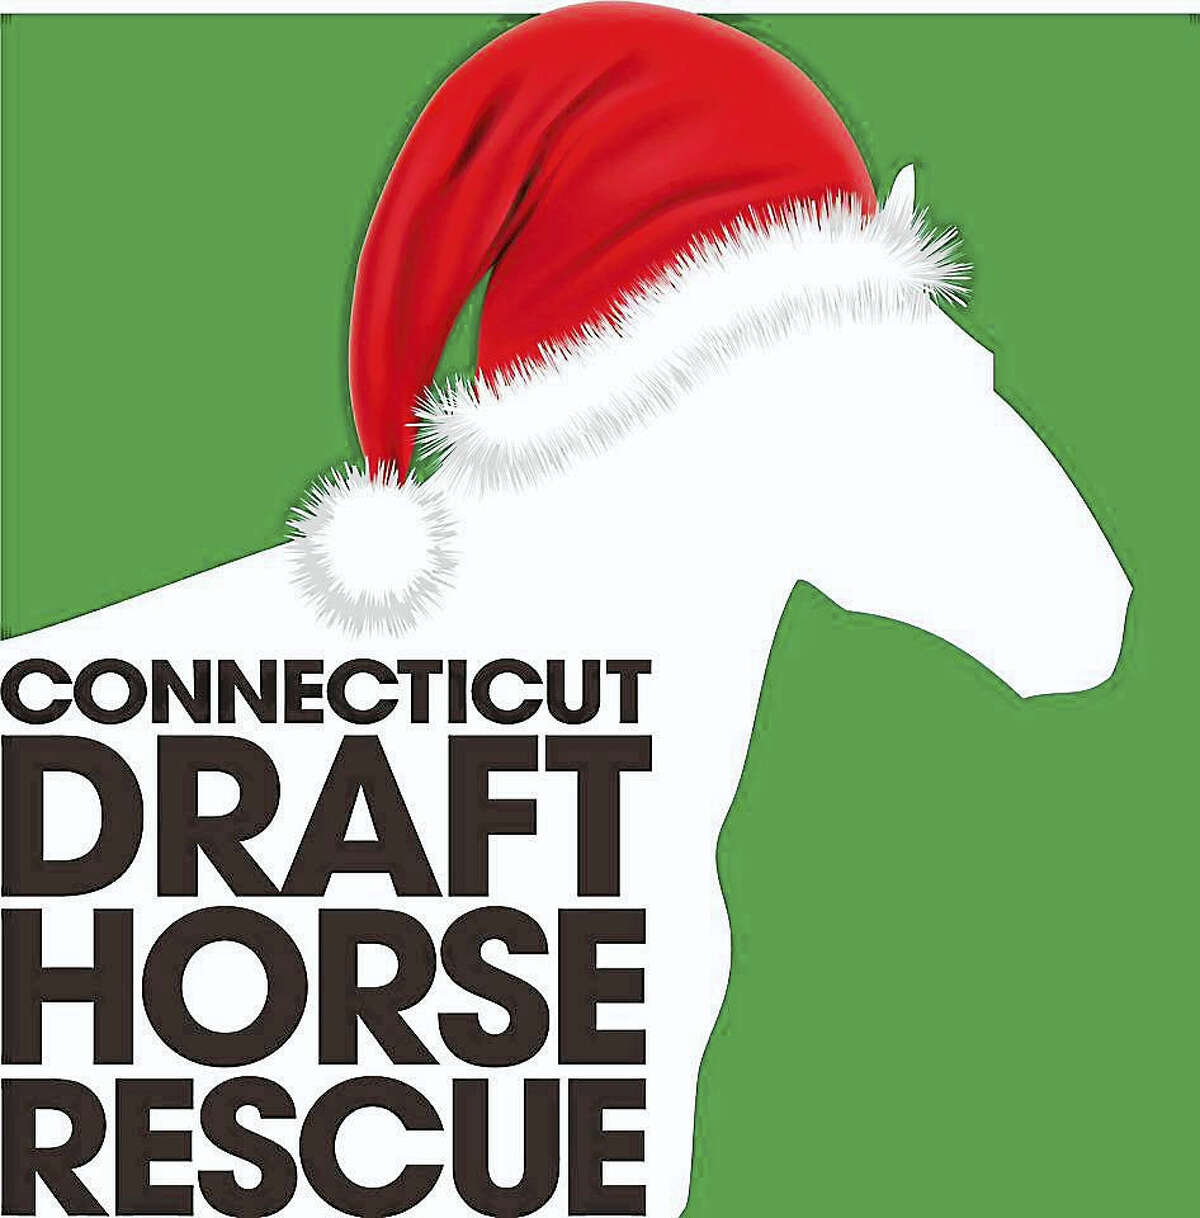 HOLIDAY OPEN HOUSE: Holiday Open House at the Connecticut Draft Horse Rescue, 15 Rock Landing, Haddam Neck, will be held Dec. 3, 11 a.m.-3 p.m. at the farm, with food, photos with Santa and Mrs. Claus, silent auction, mini shops and more. Bring a wish list items and get a free raffle ticket; find the list at ctcraftrescue.com.